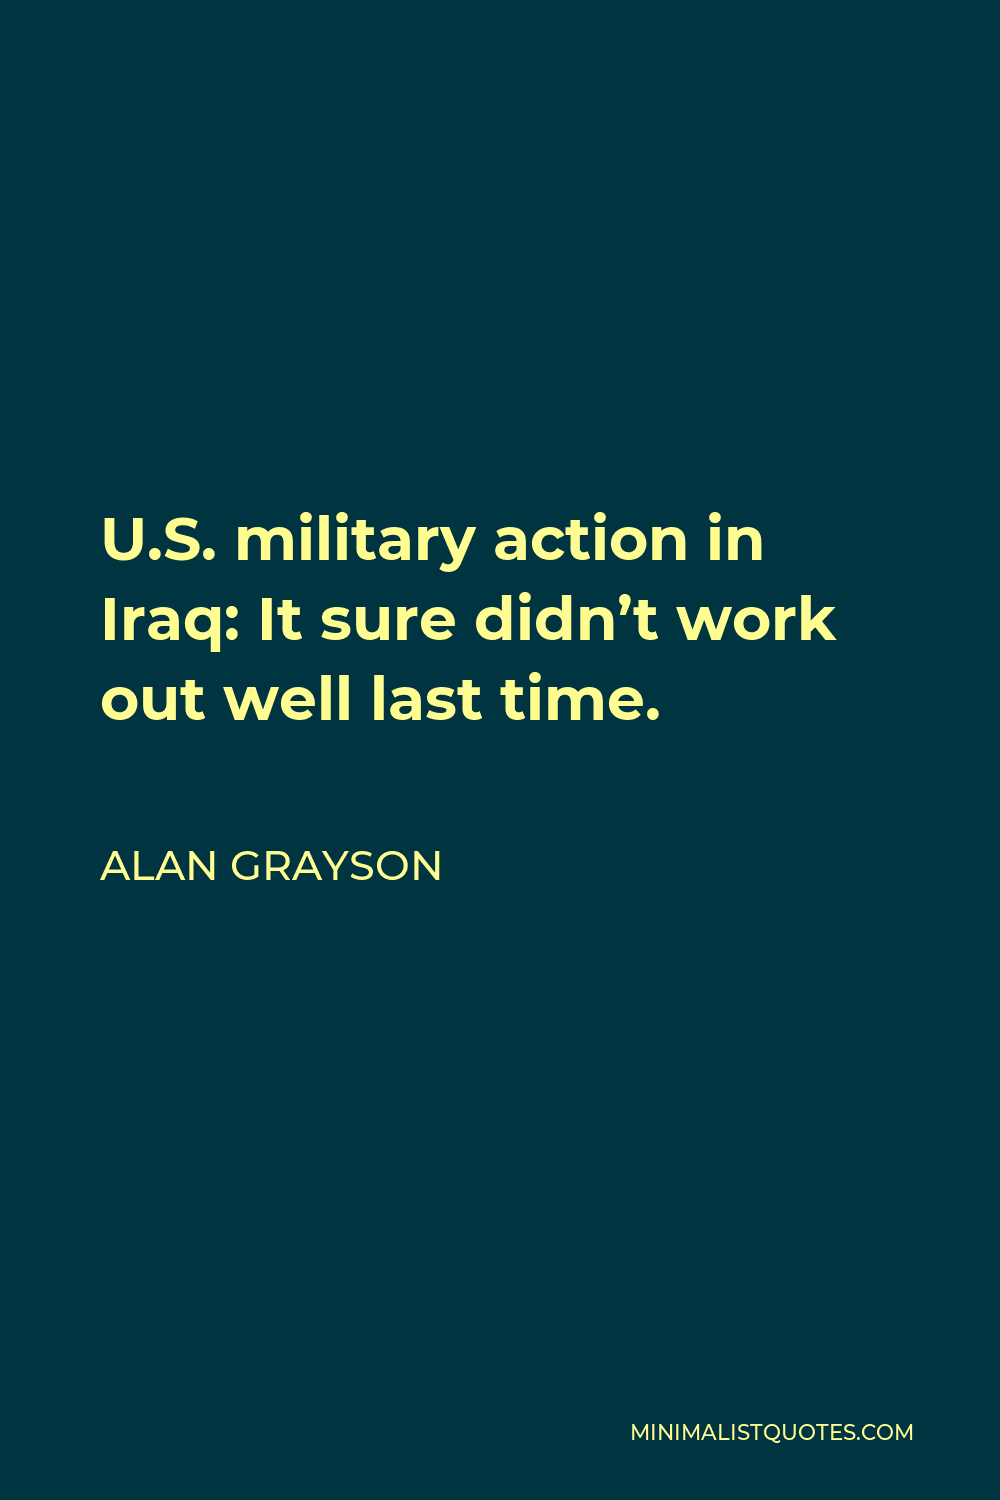 Alan Grayson Quote - U.S. military action in Iraq: It sure didn’t work out well last time.